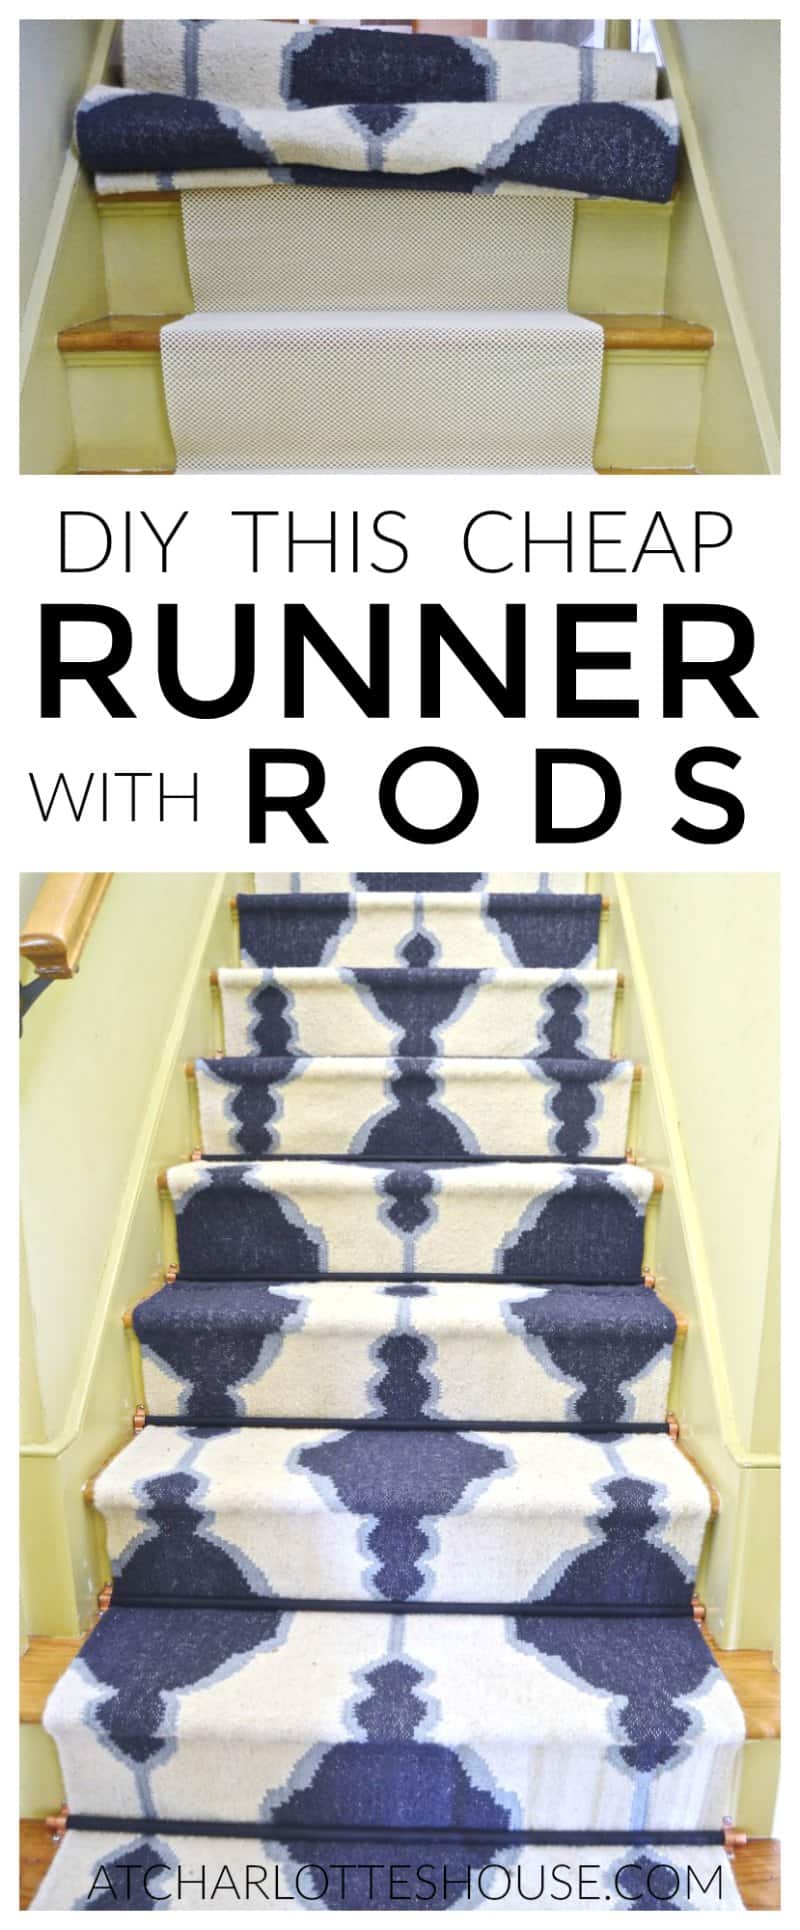 Super inexpensive and easy way to add a staircase runner WITH stair rods... under $20 if you can believe it!